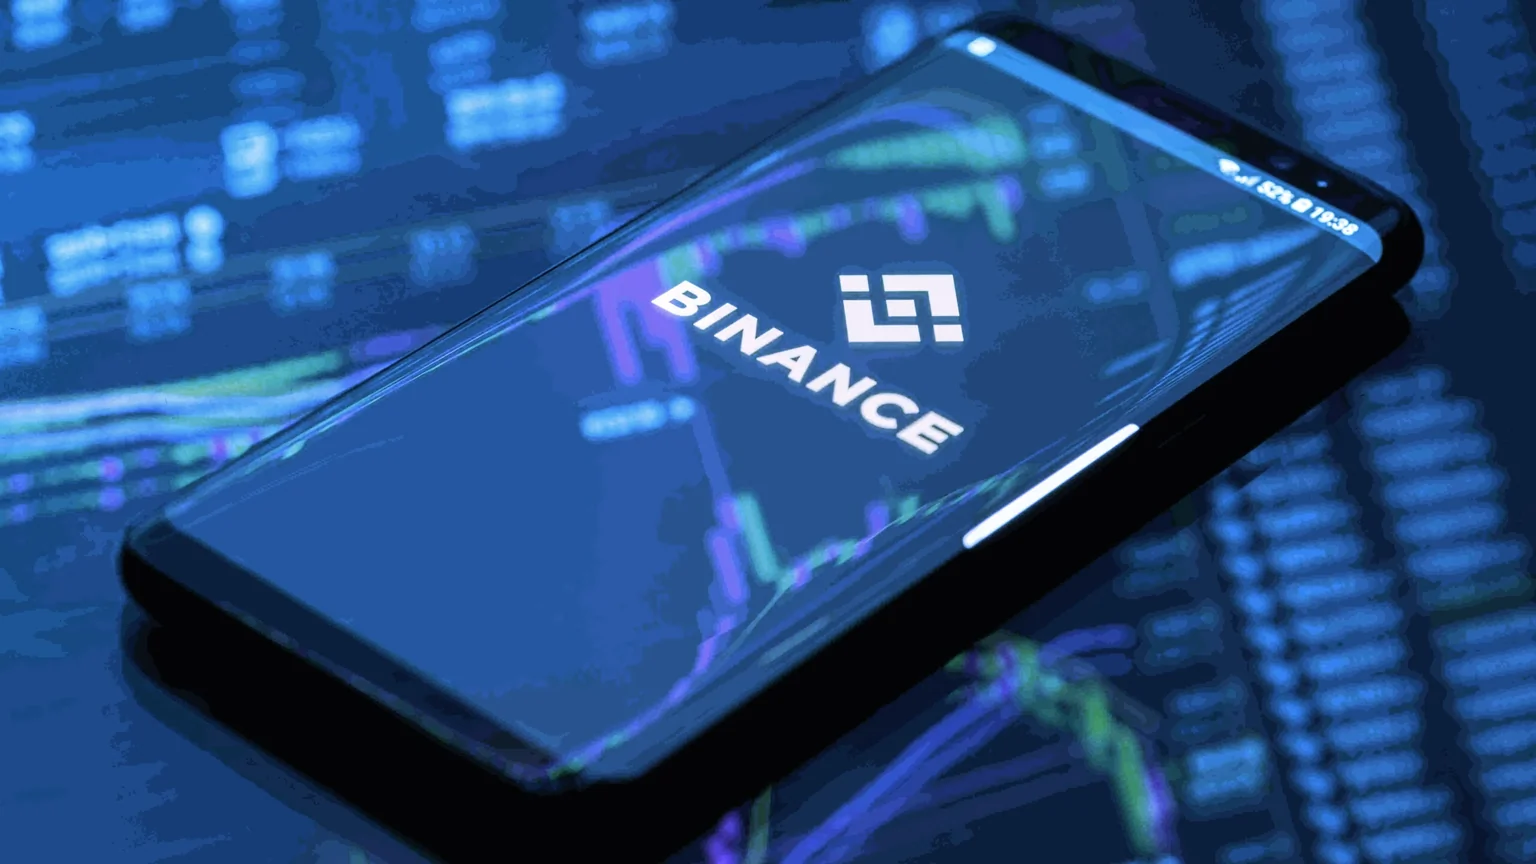 Binance has seen record futures volumes this month. Image: Shutterstock